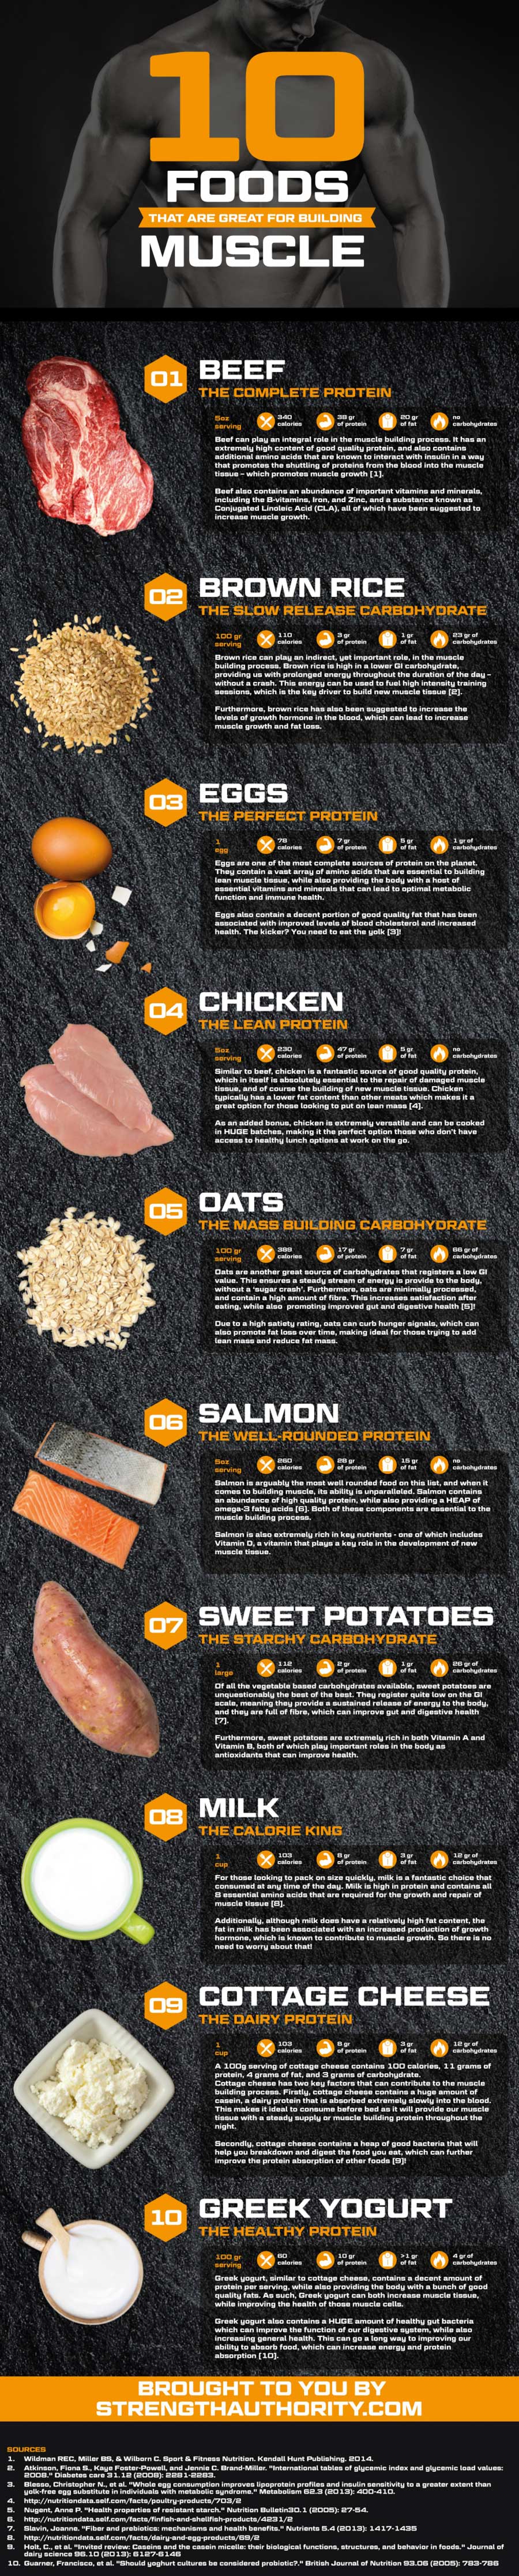 Foods For Building Muscle